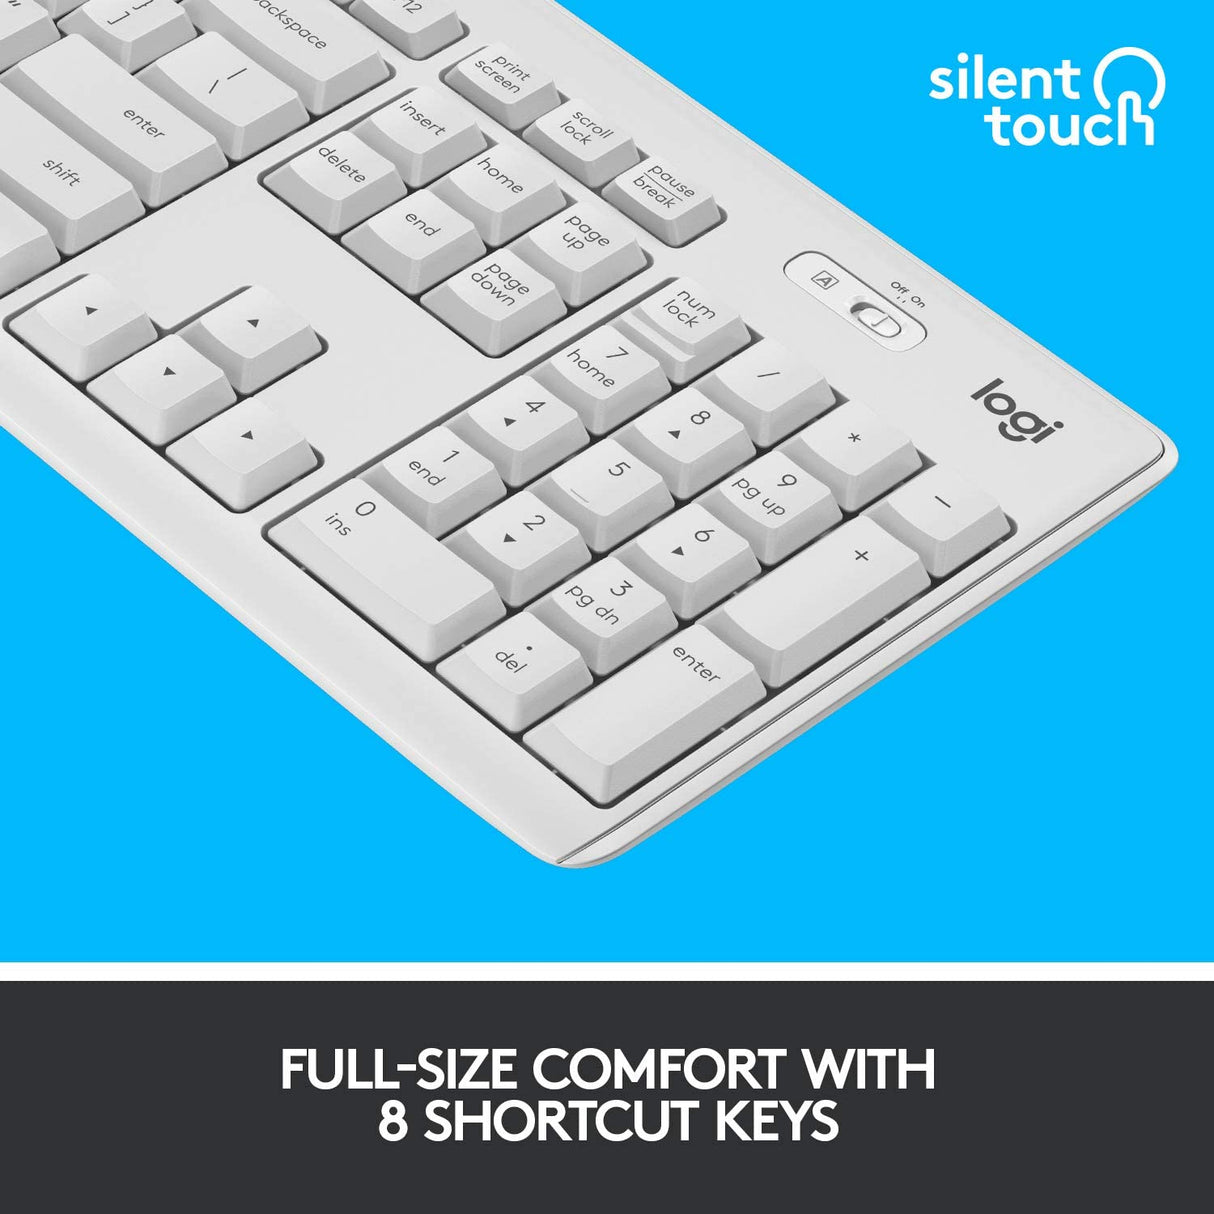 Logitech MK295 Wireless Mouse &amp; Keyboard Combo with SilentTouch Technology, Full Numpad, Advanced Optical Tracking, Lag-Free Wireless, 90% Less Noise - Off White